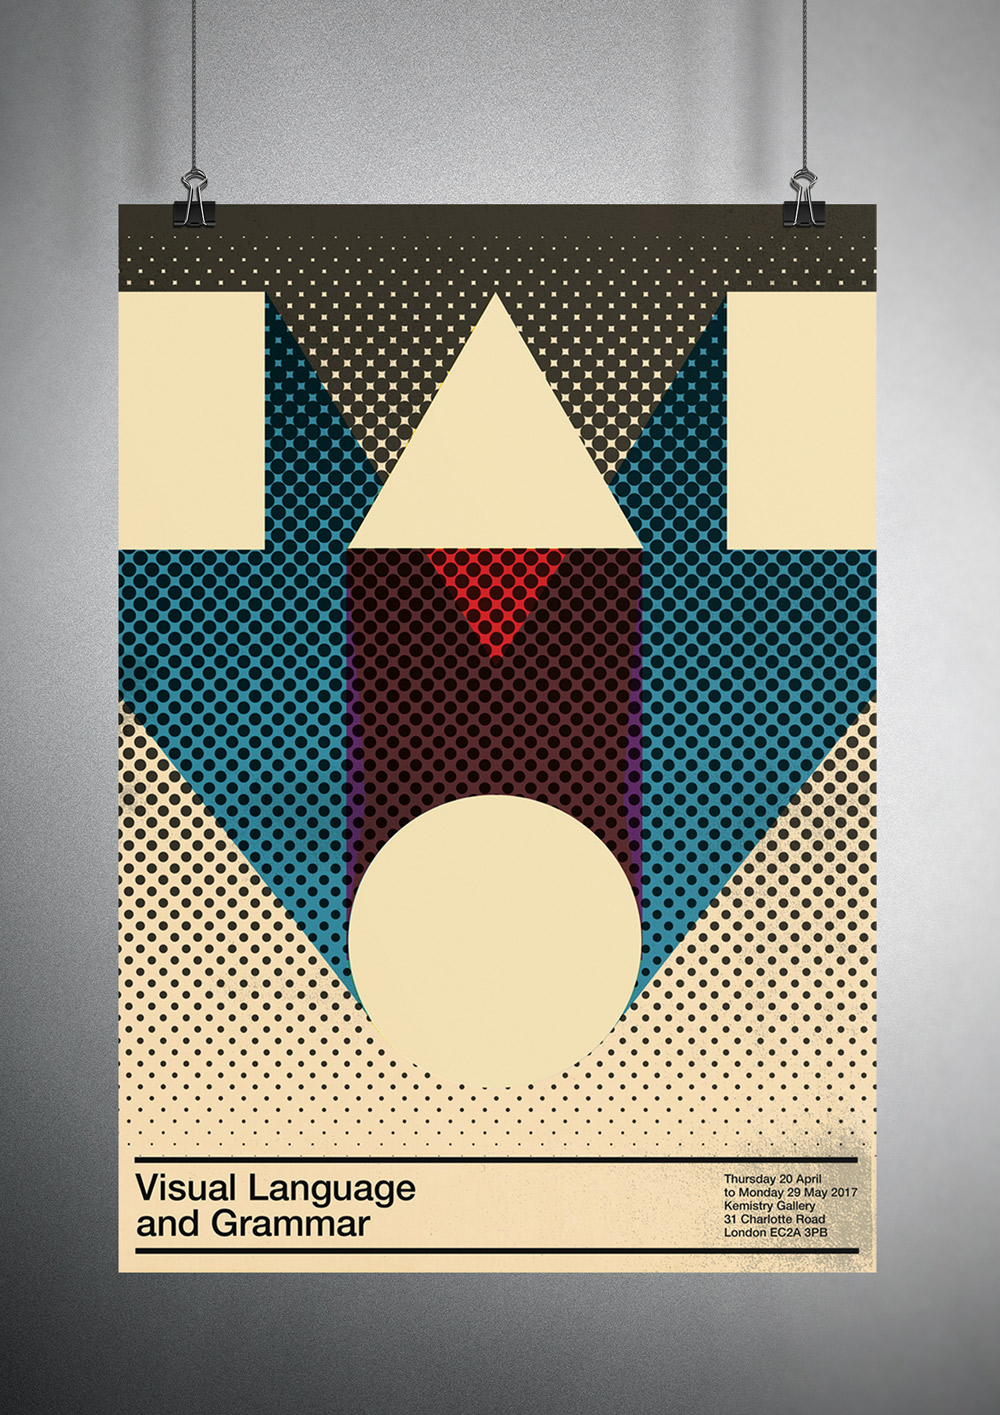  Poster for series of talks on Visual Language and Grammar. 